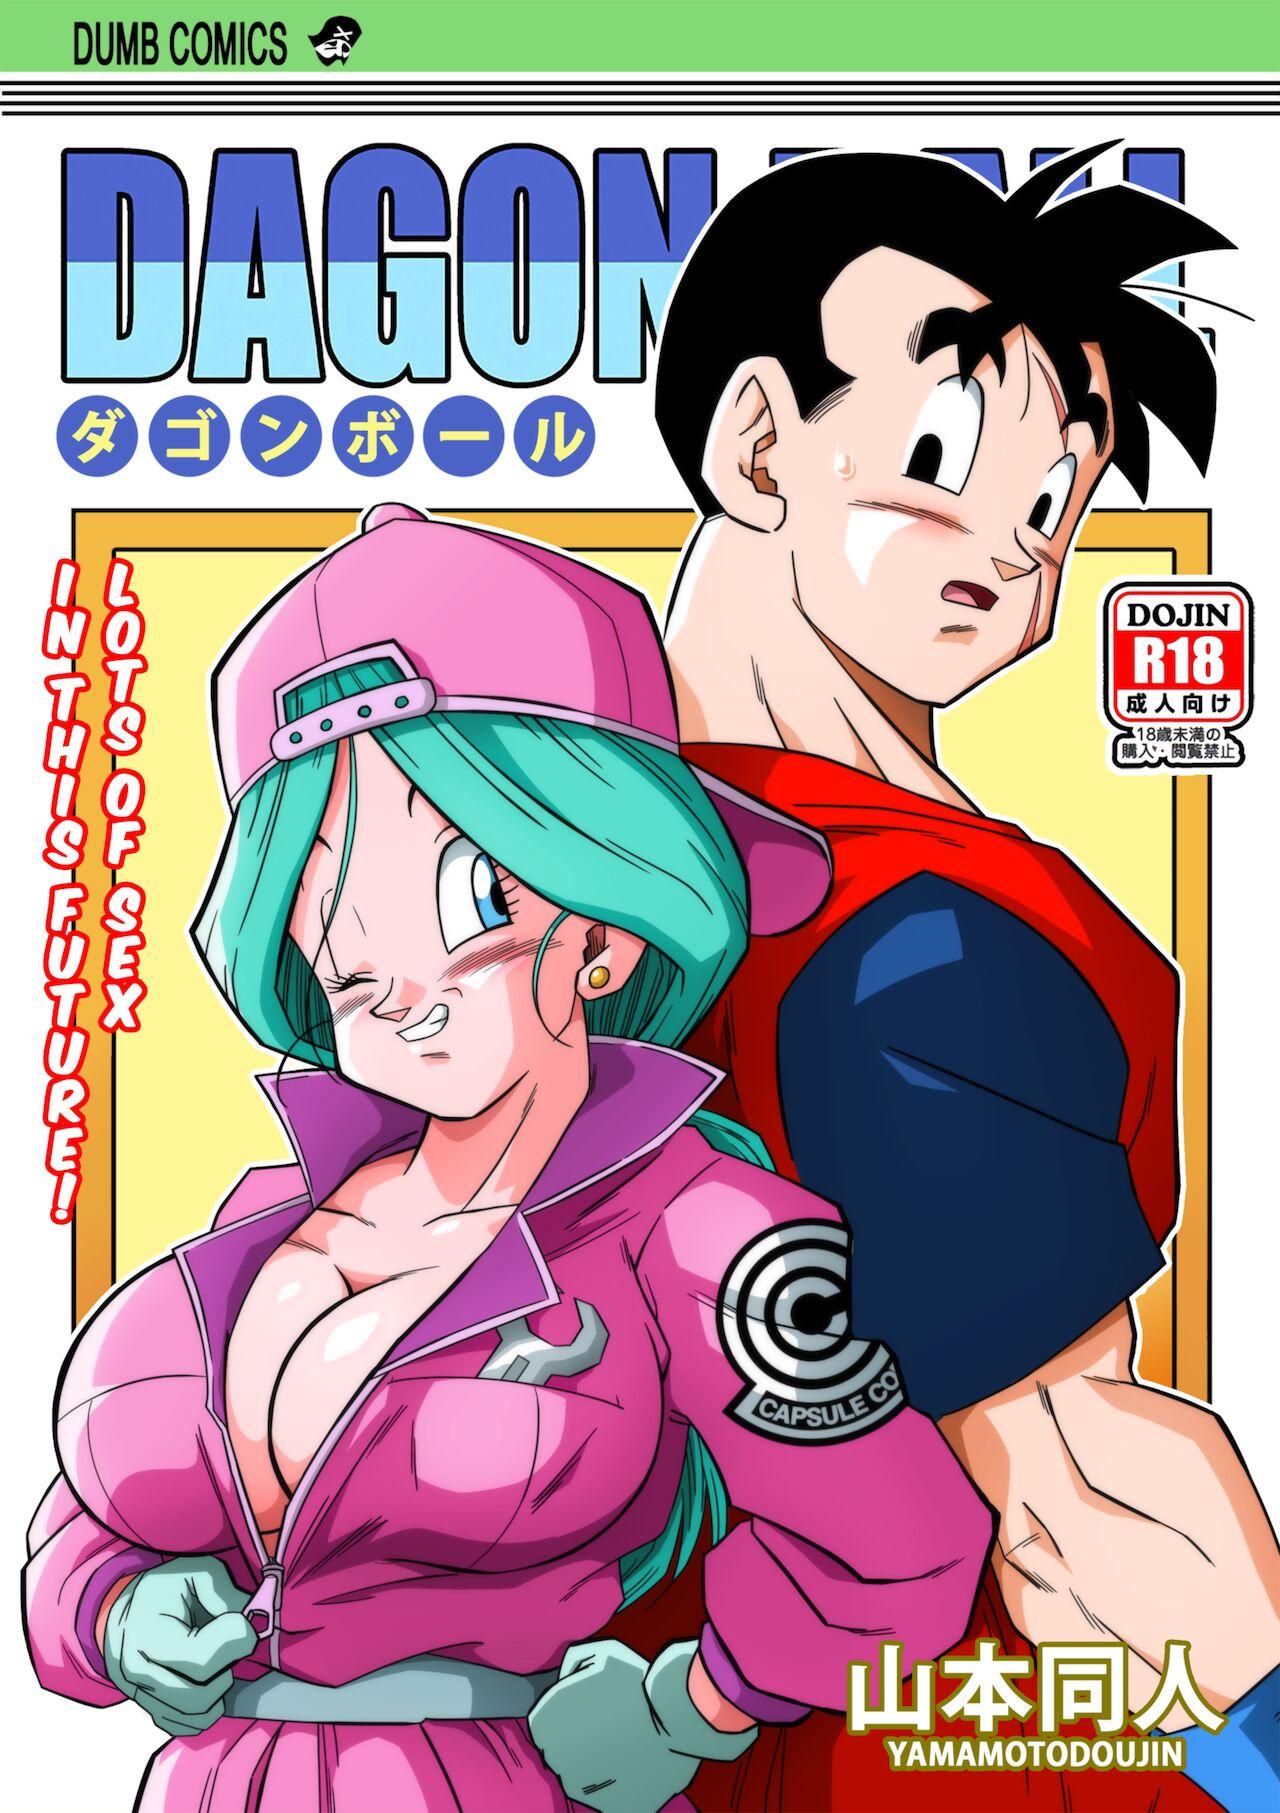 Boquete Lots of Sex in this Future!! - Dragon ball z Watersports - Page 1